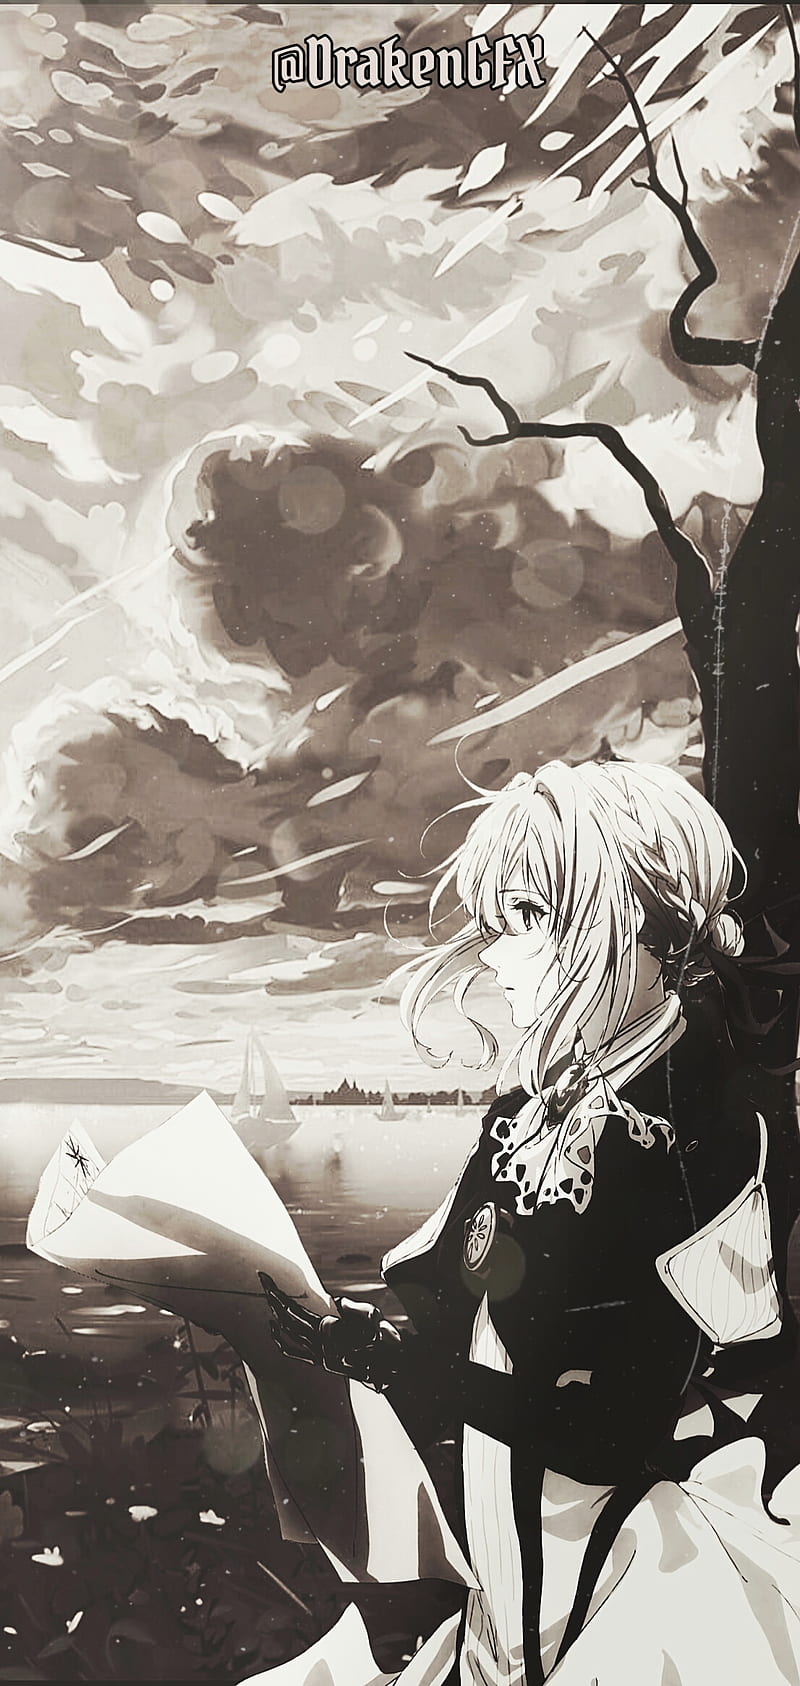 Violet Evergarden, Sky, Meadow, Cool , Landscape, Android backgrounds, Cool backgrounds, Gilbert, Iphone, iPhone , Romance, Anime, B&W, Android , Anime girl, black and white, Manga, iPhone backgrounds, HD phone wallpaper